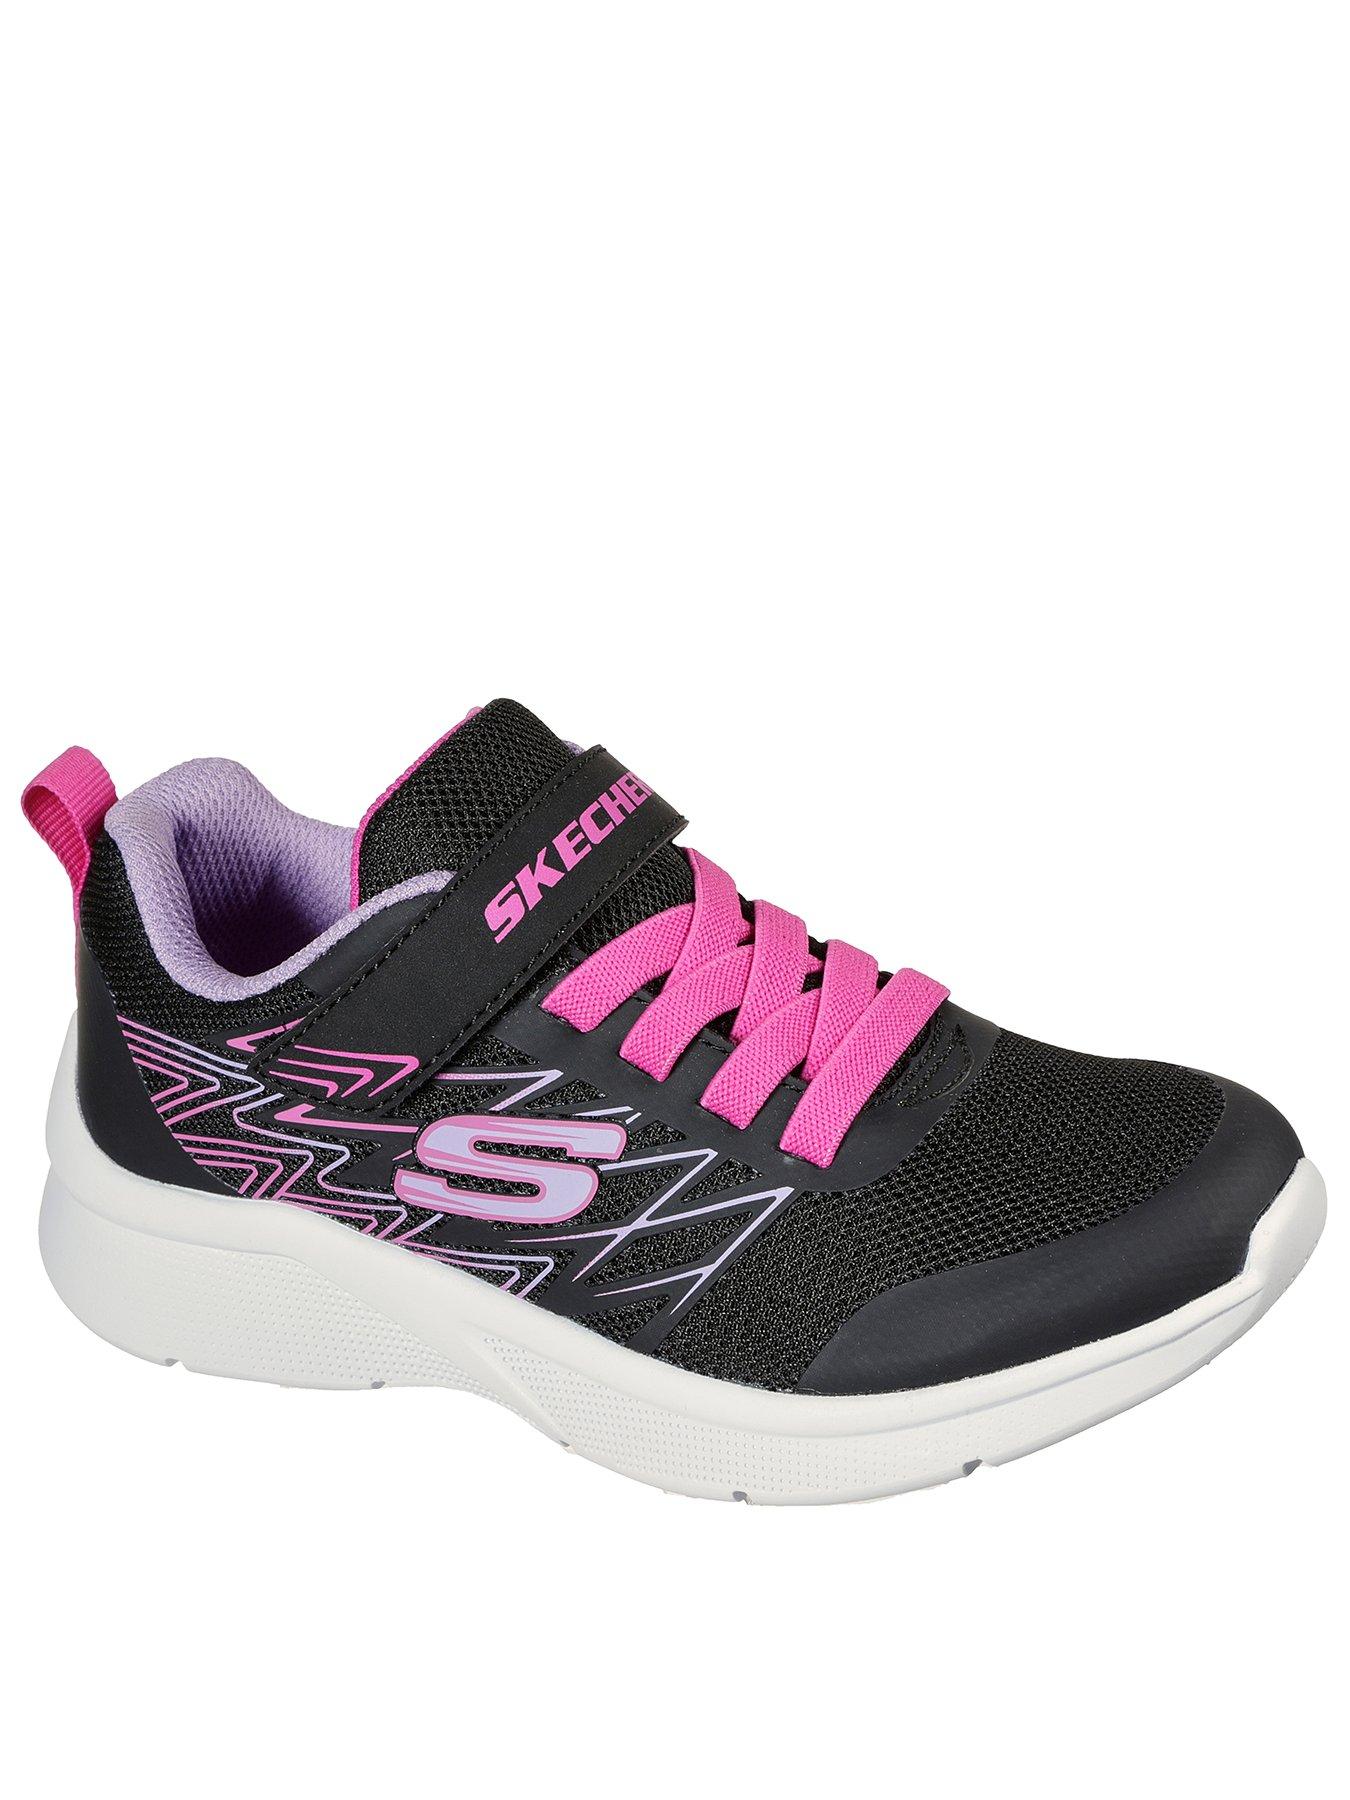 All Black Friday Deals | Under 30% | Skechers | Child & baby www.very.co. uk